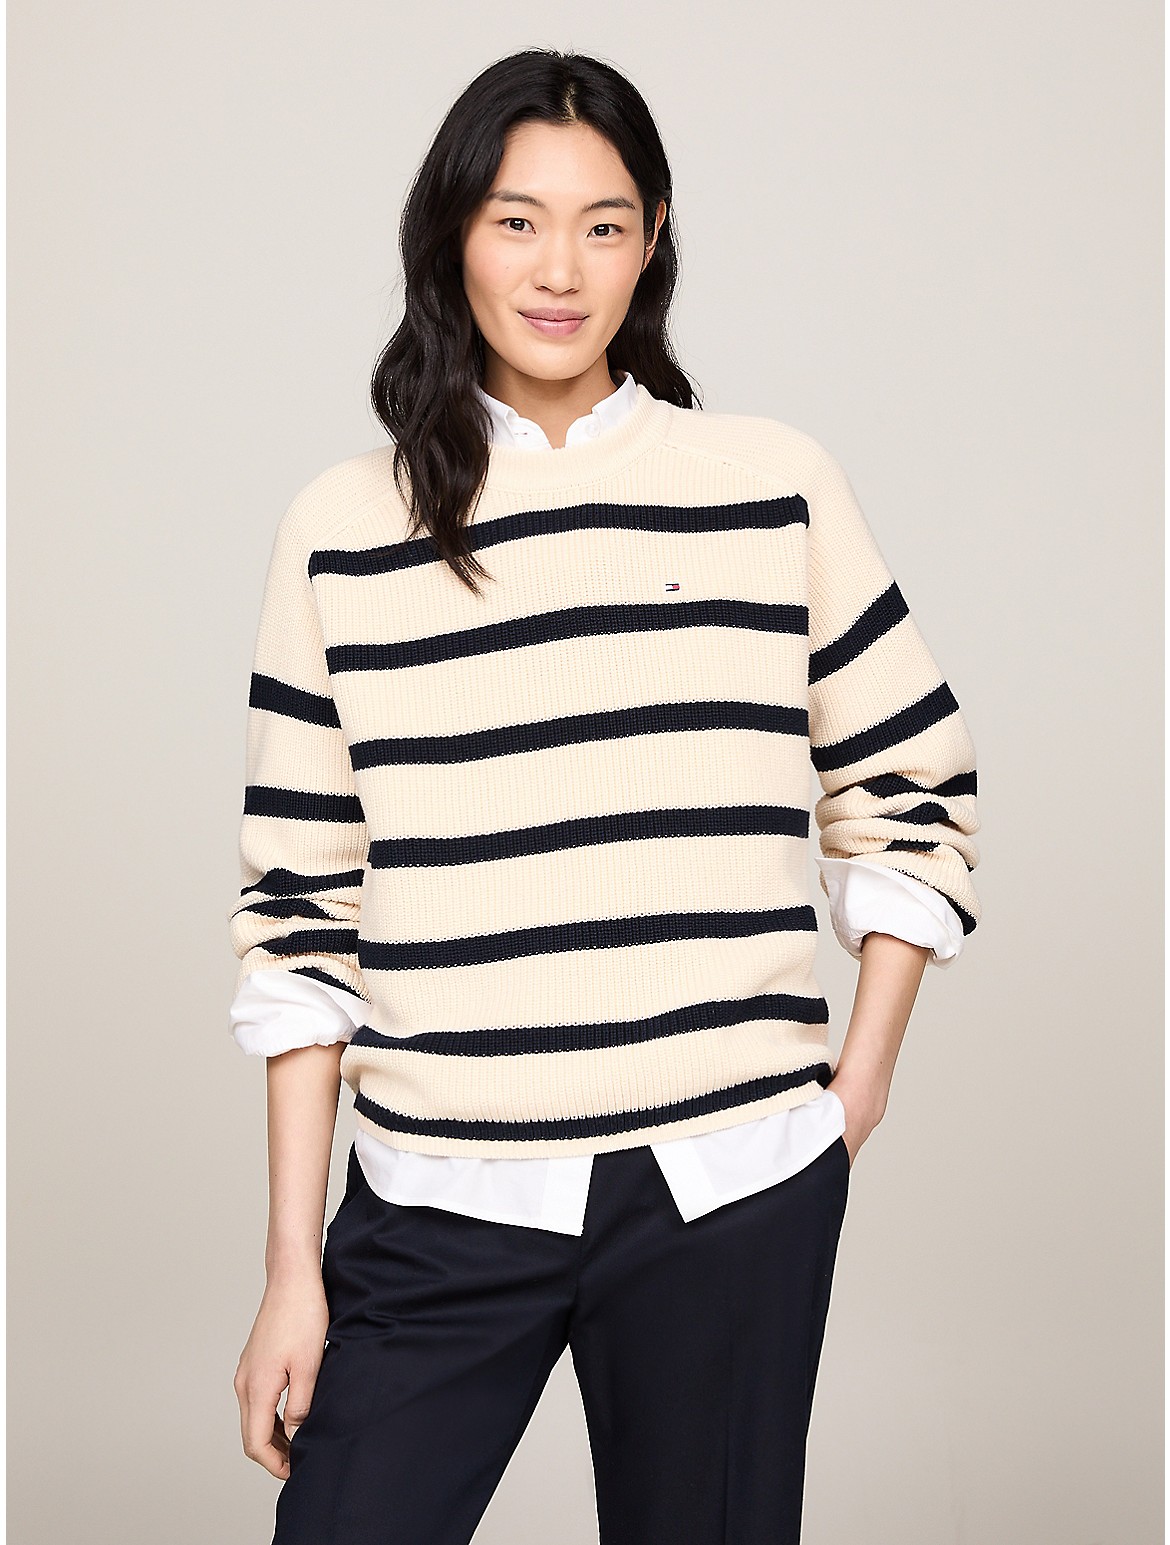 Tommy Hilfiger Women's Relaxed Fit Raglan-Sleeve Sweater